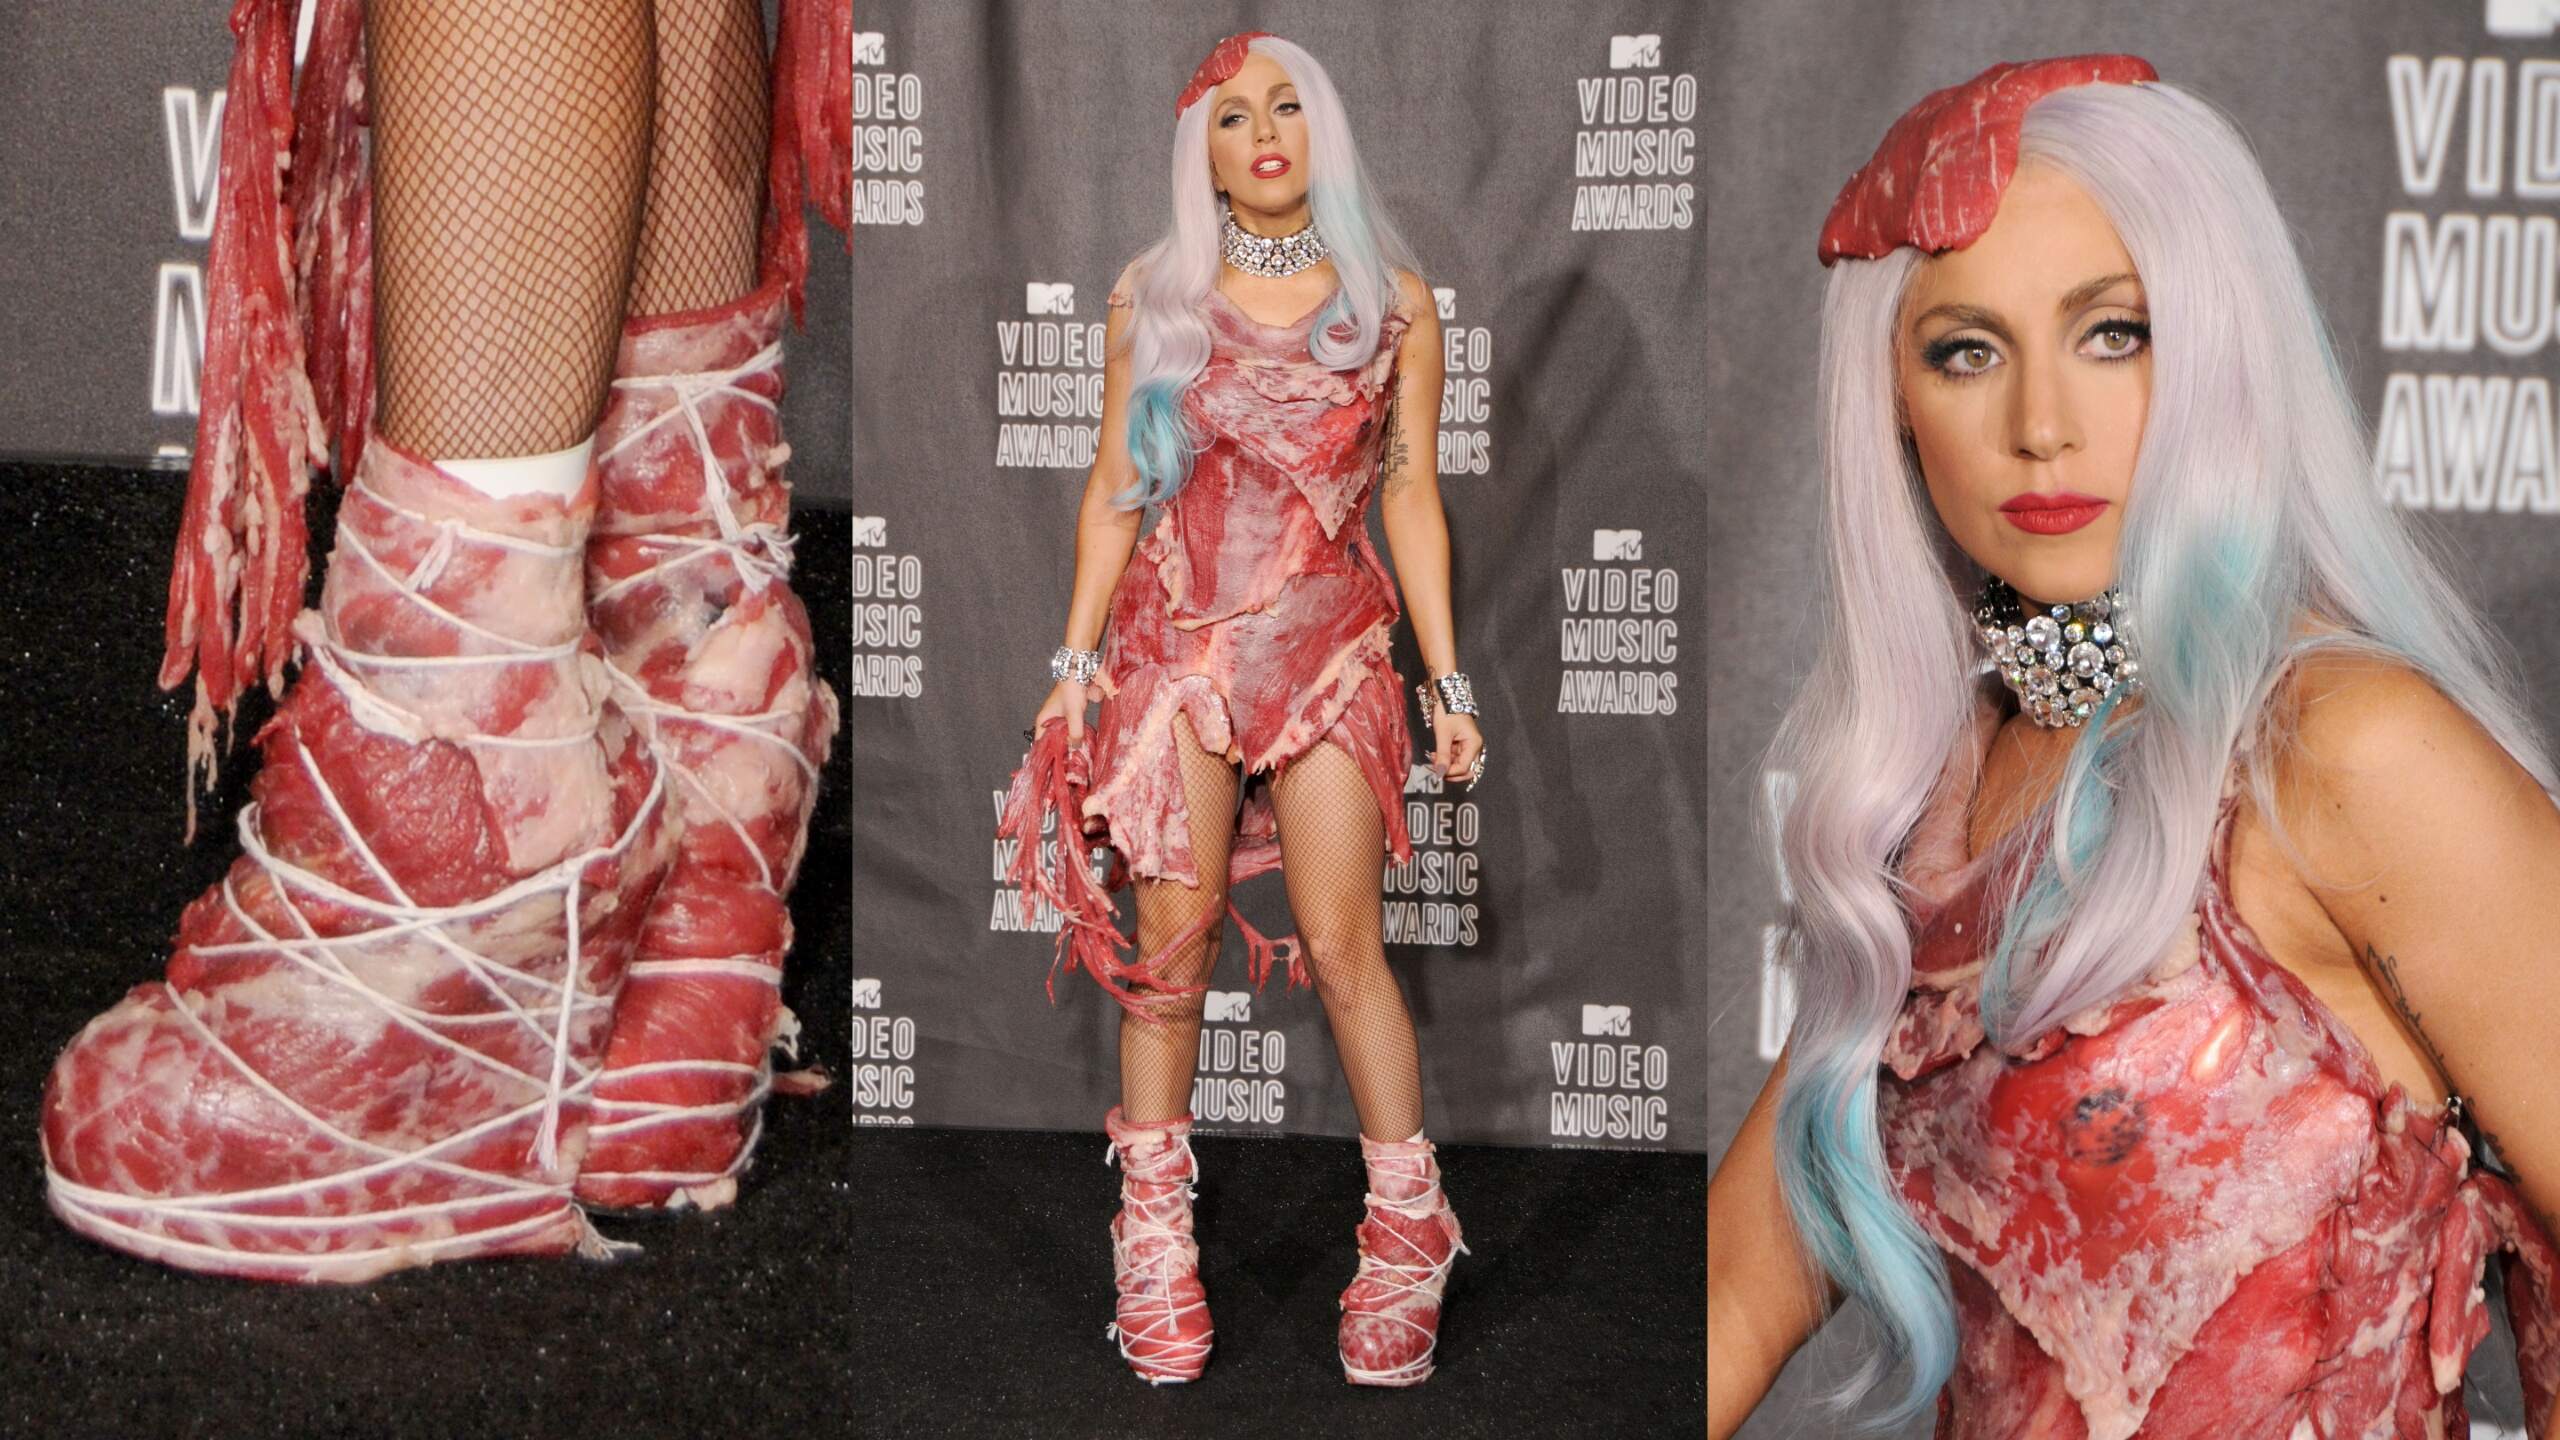 Singer Lady Gaga poses in the press room wearing a full meat dress at the 2010 MTV Video Music Awards